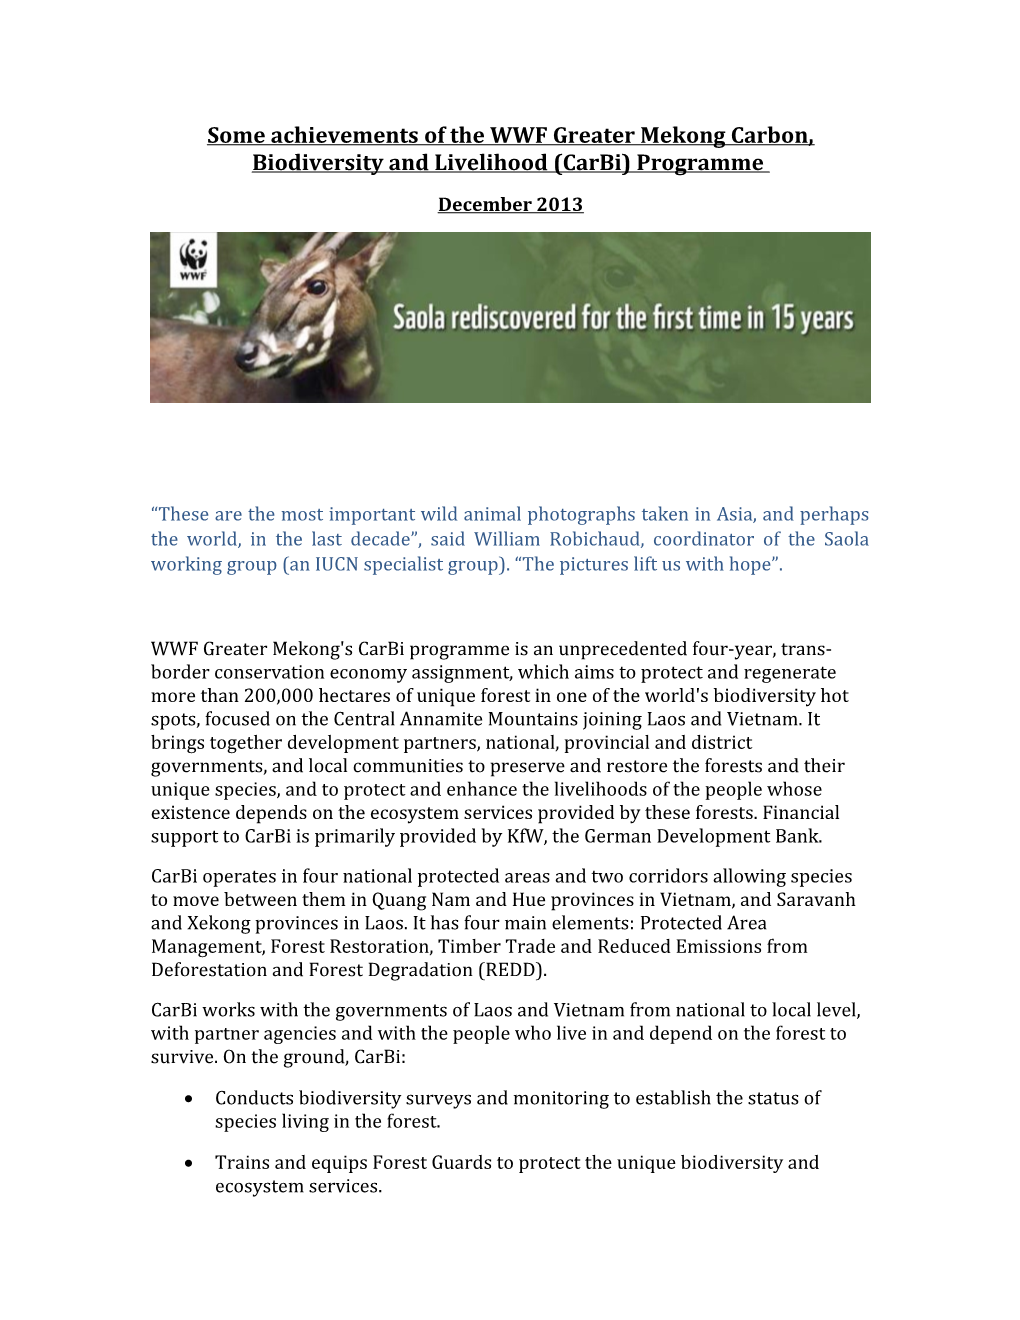 Some Achievements of the WWF Greater Mekong Carbon, Biodiversity and Livelihood (Carbi)